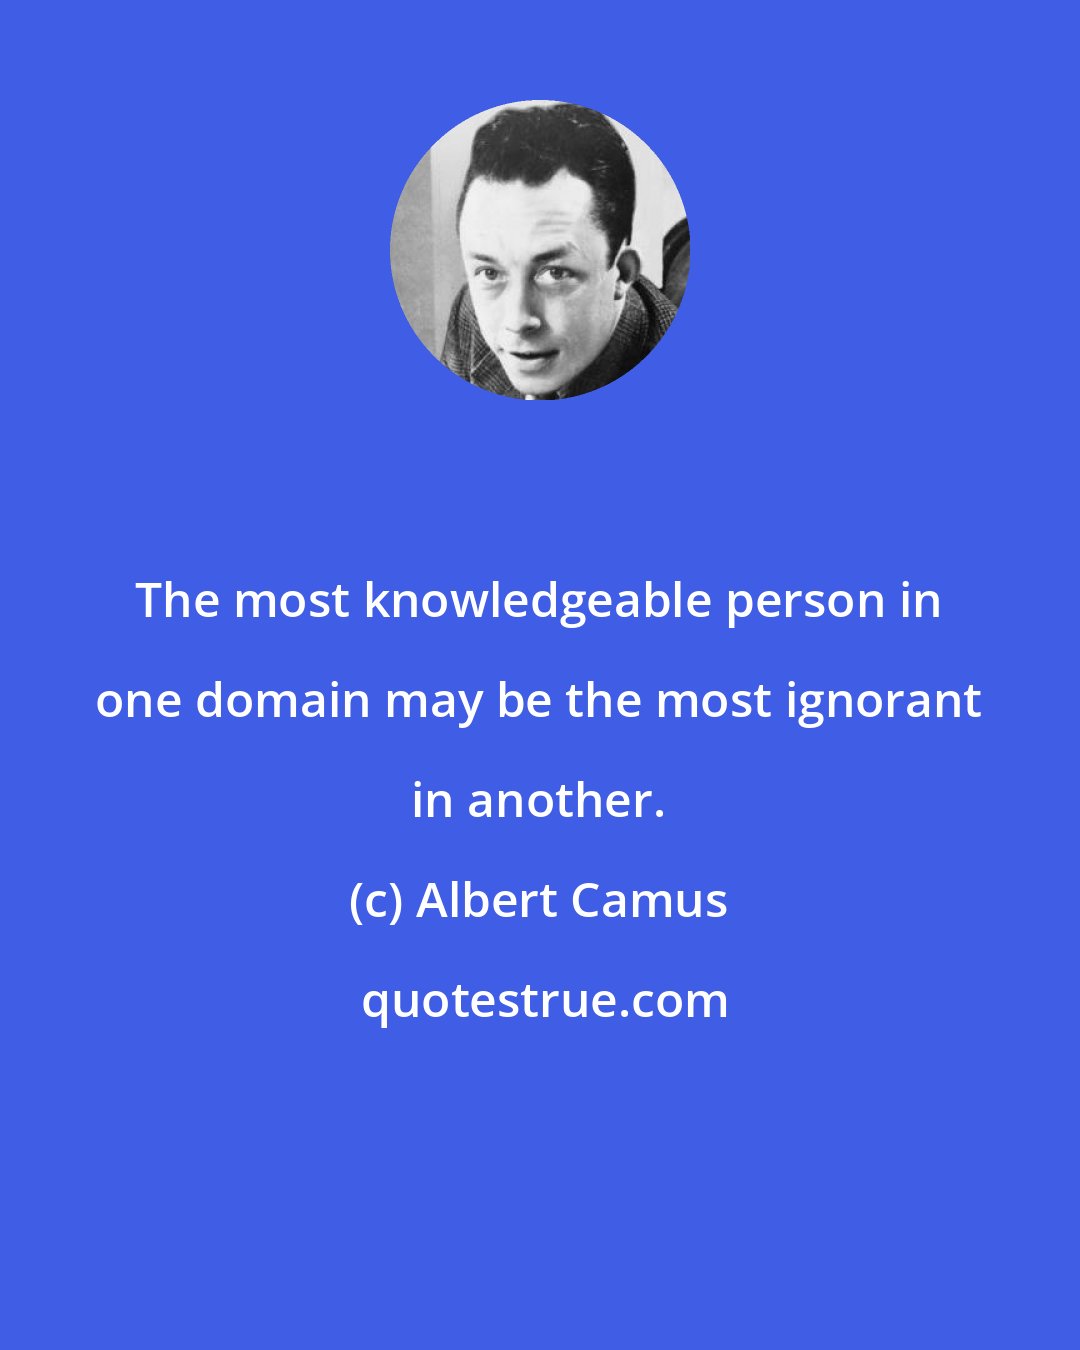 Albert Camus: The most knowledgeable person in one domain may be the most ignorant in another.